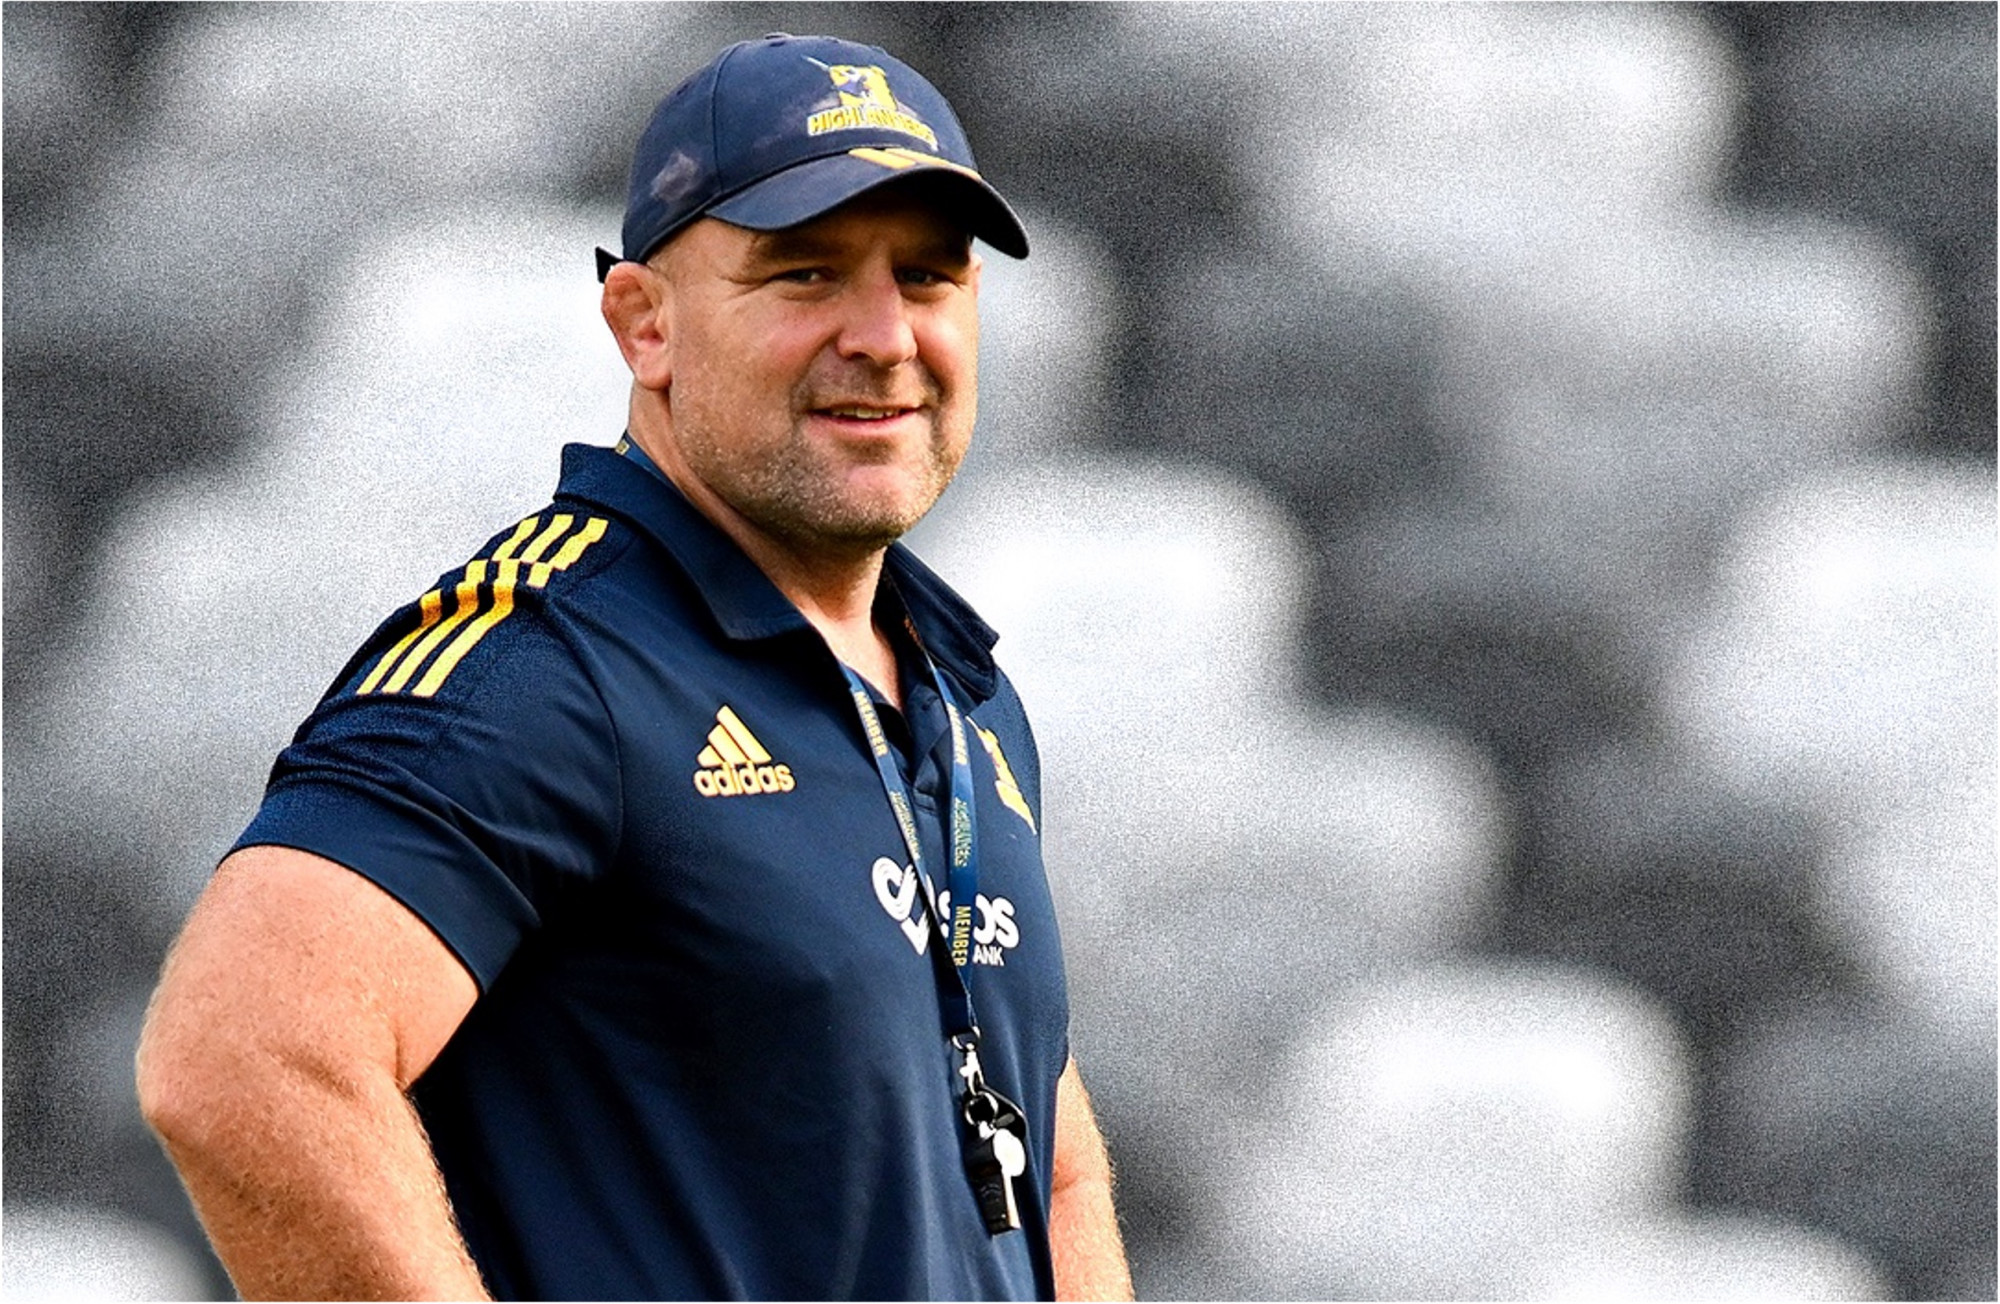 Highlanders Support Local With Head Coach Appointment  | Highlanders Rugby Club Limited Partnership